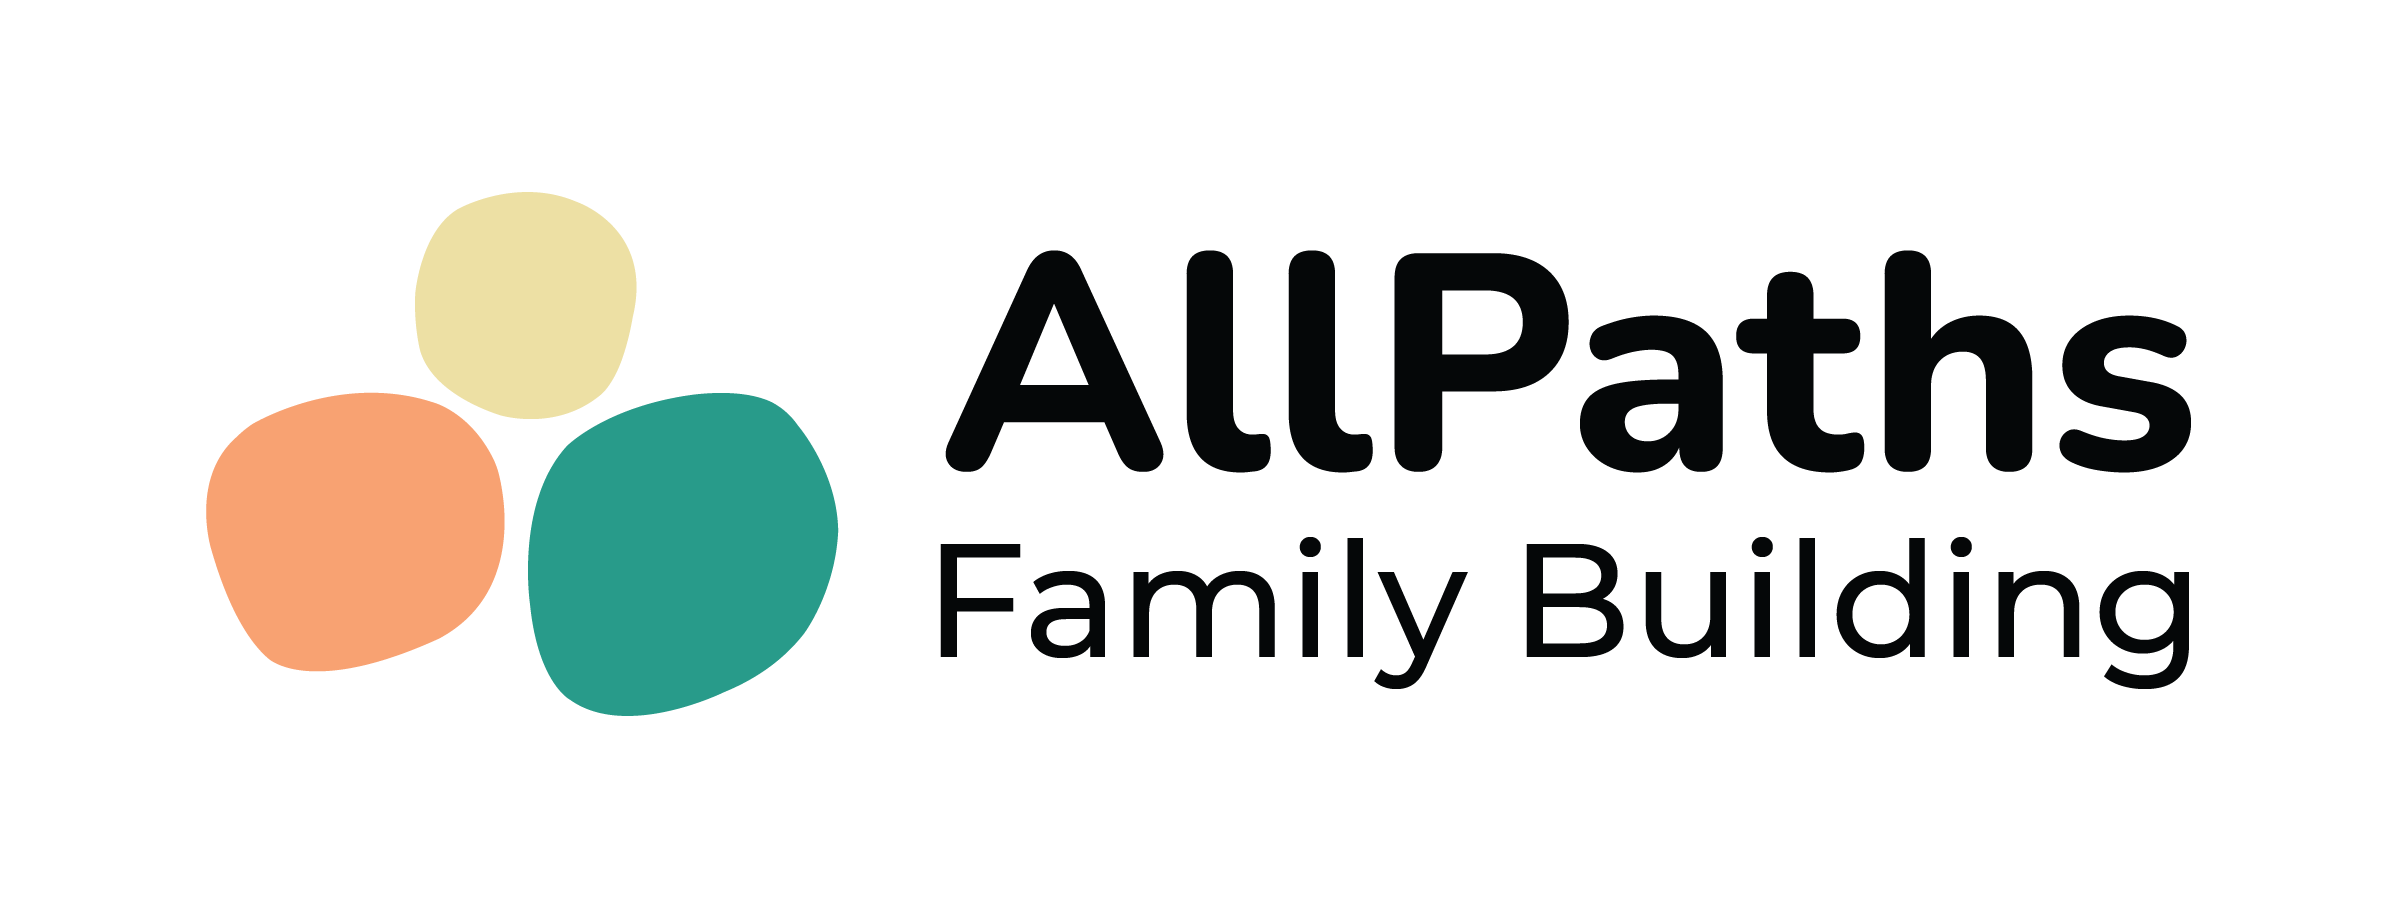 AllPaths Family Building